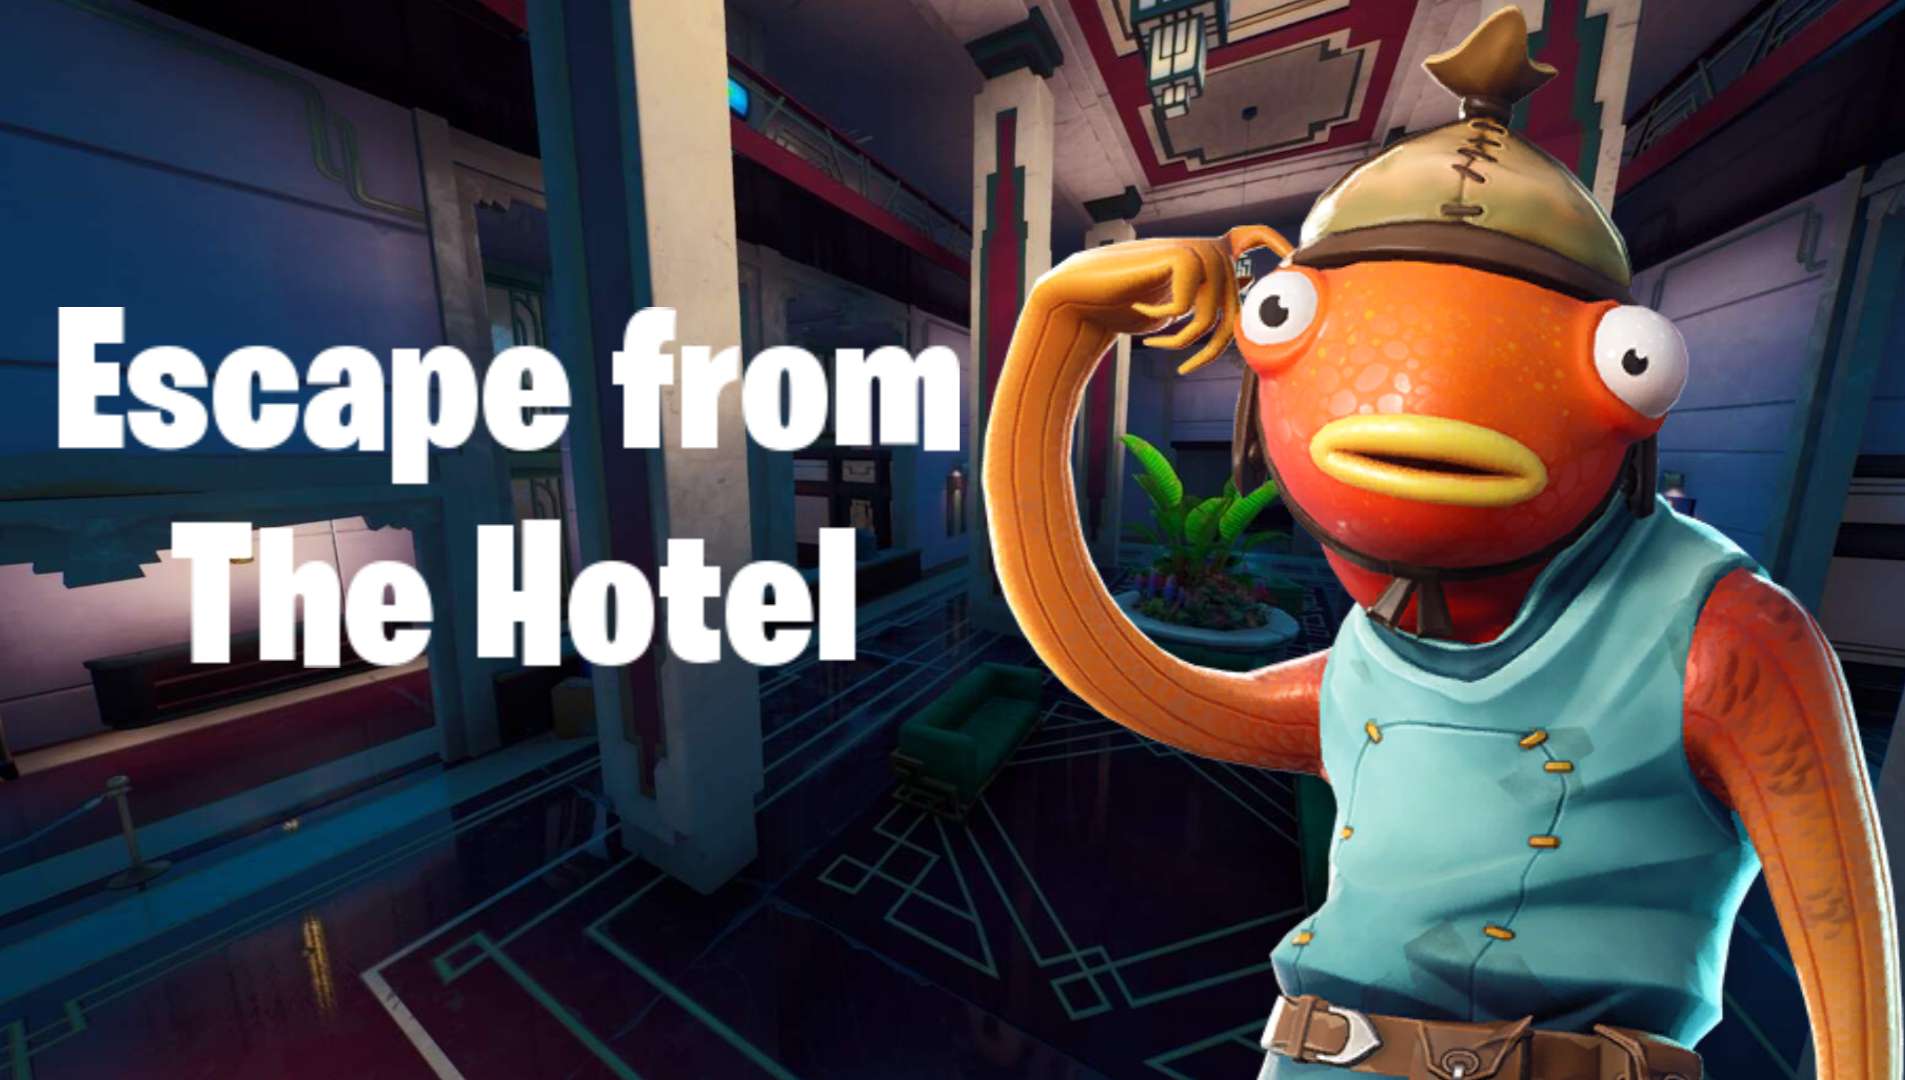 ESCAPE FROM THE HOTEL